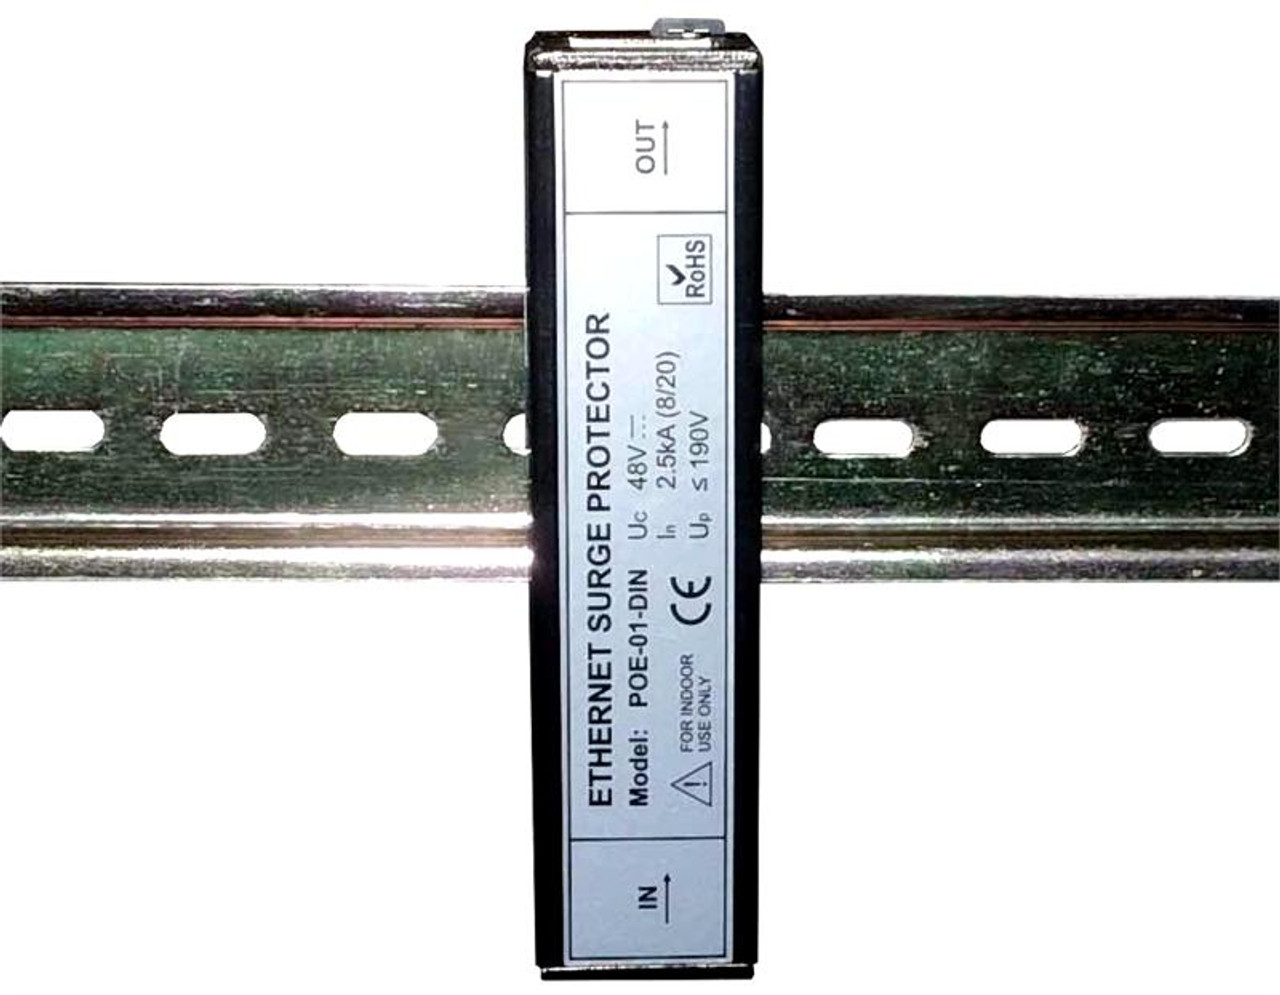 DINRAIL-19 - metal DIN RAIL, 19 long, EN50022/TS35 compatible 35x7.5mm  section for POE-01-DIN group installation